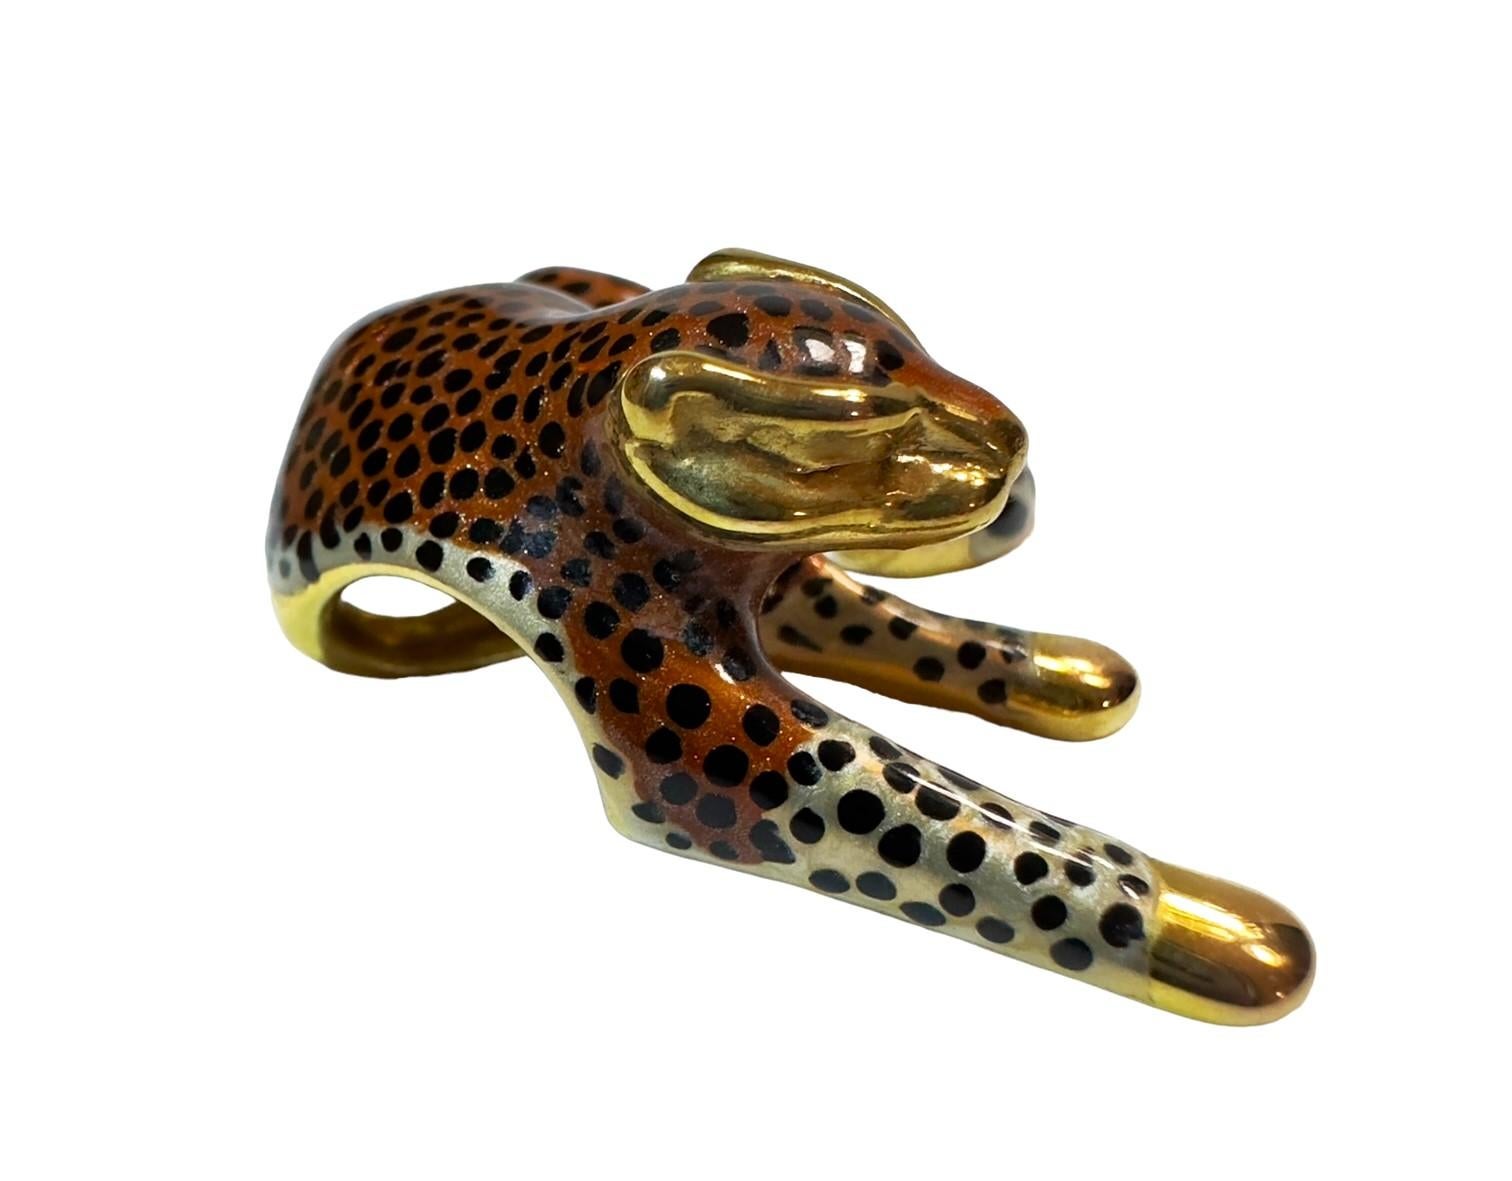 14K YG Signed SLC Enamel Leopard Hollow Slide Pendent with Magnetic Chain In Excellent Condition For Sale In Eagan, MN